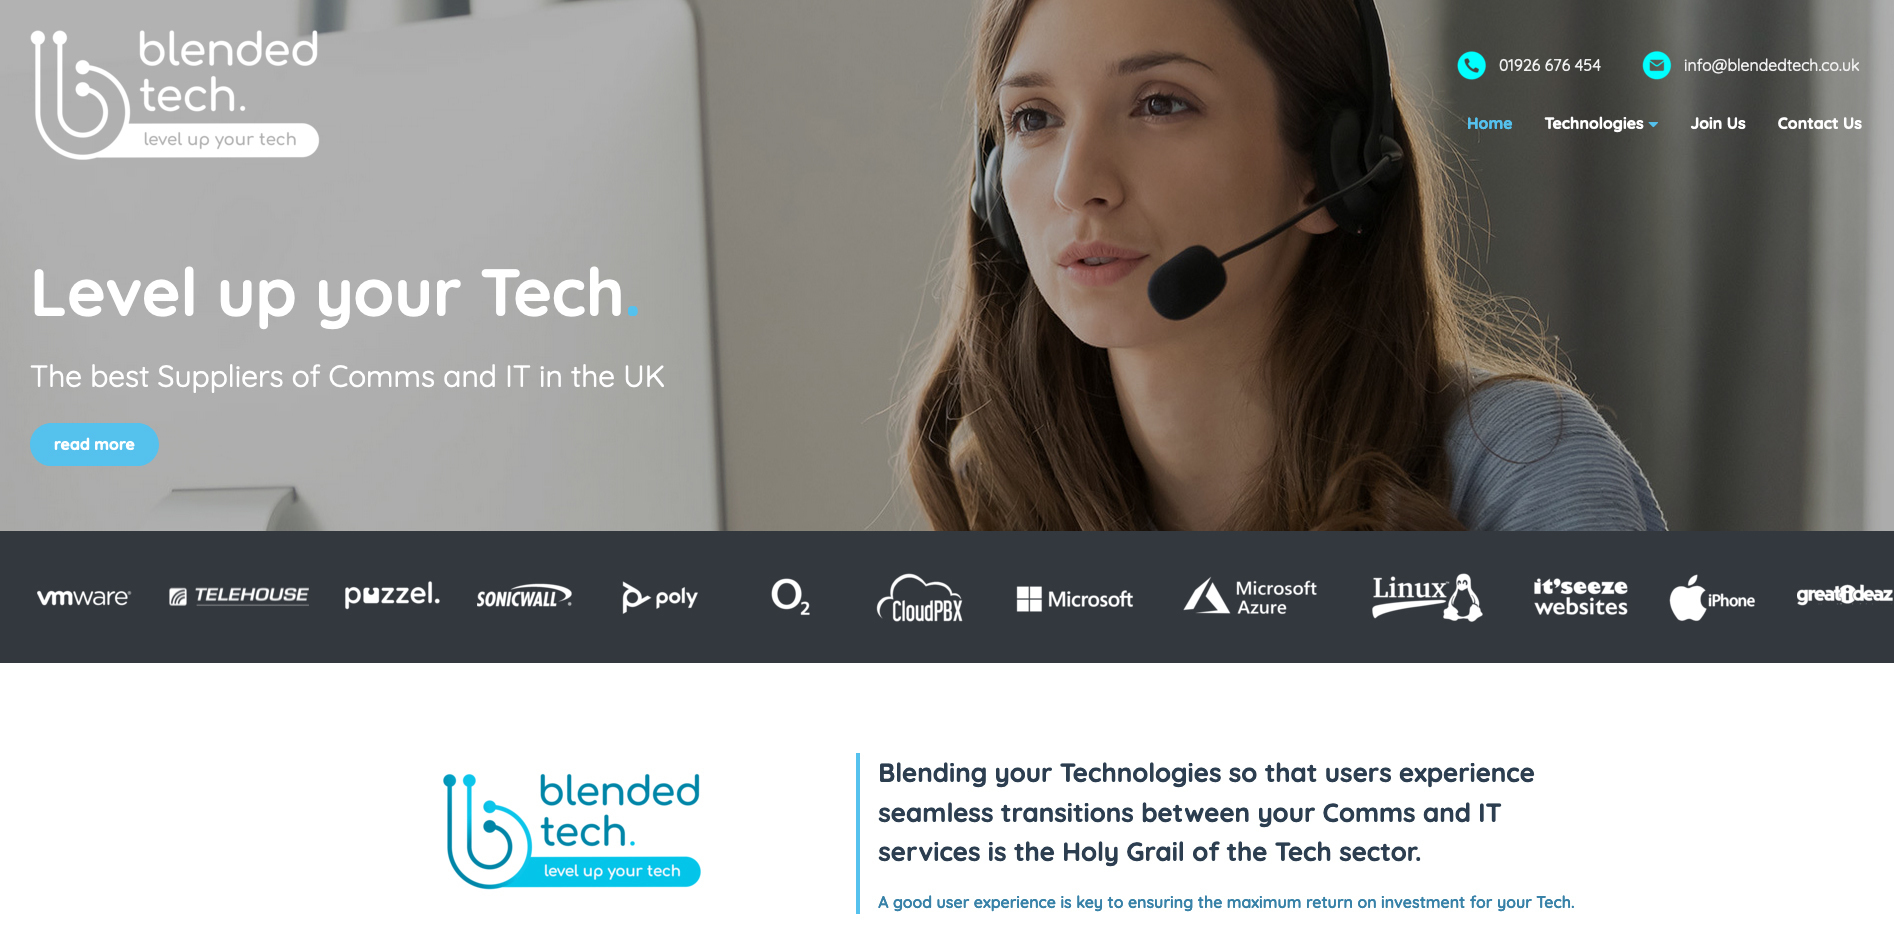 The new Blended Tech website designed by it'seeze, displayed on desktop